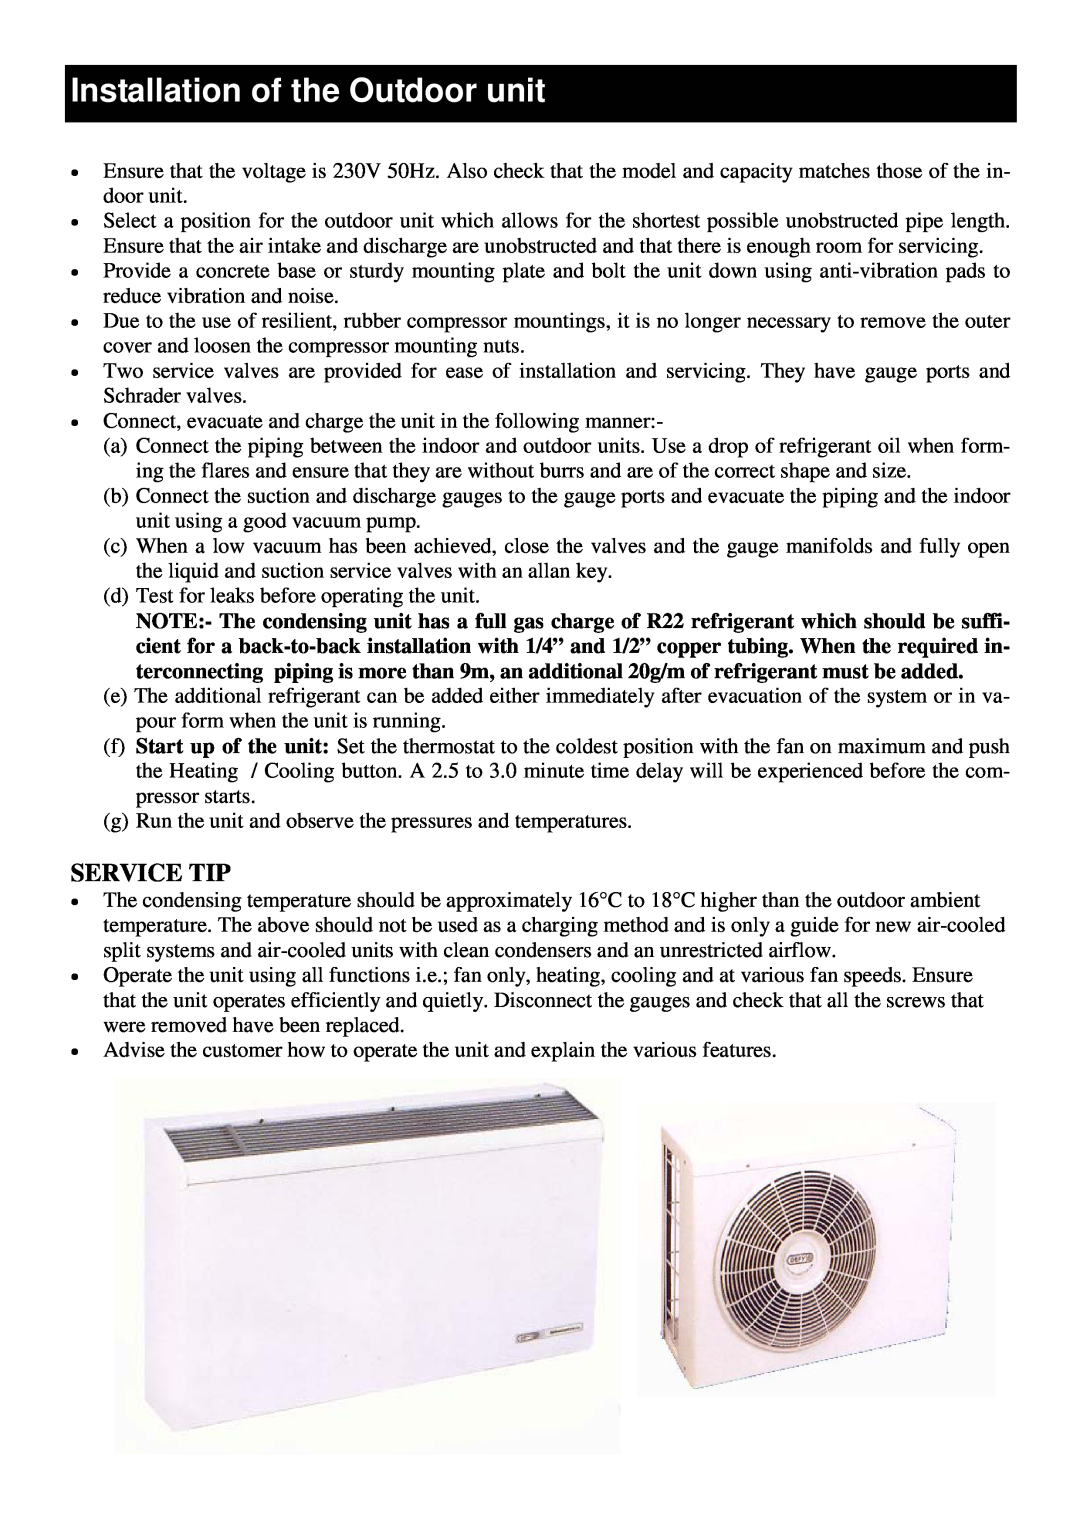 Defy Appliances Part Number 059 044 installation instructions Installation of the Outdoor unit, Service Tip 